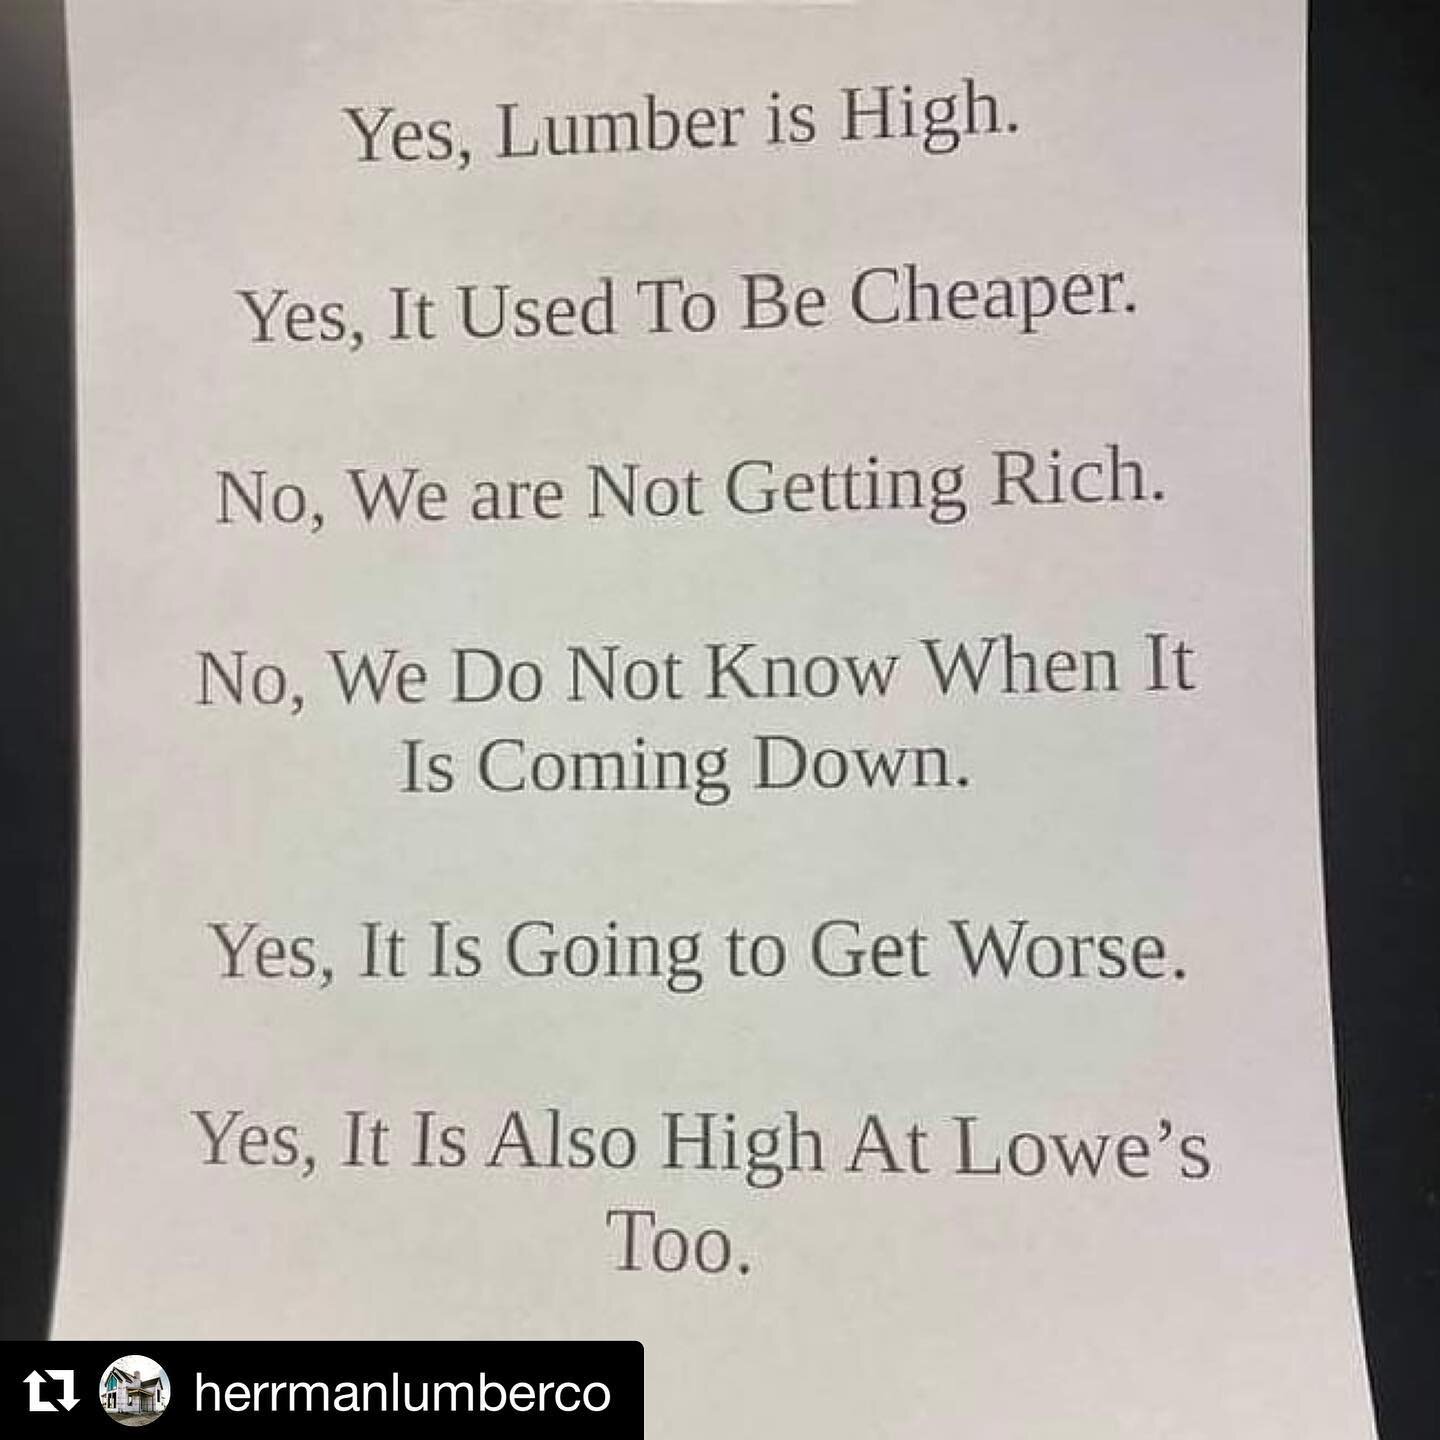 @herrmanlumberco dropping truth bombs!
We get this question at least 7 million times a week. Please be patient with us as this is totally out of our hands!

#Repost @herrmanlumberco with @get_repost
・・・
Please understand. This is the world we are in 